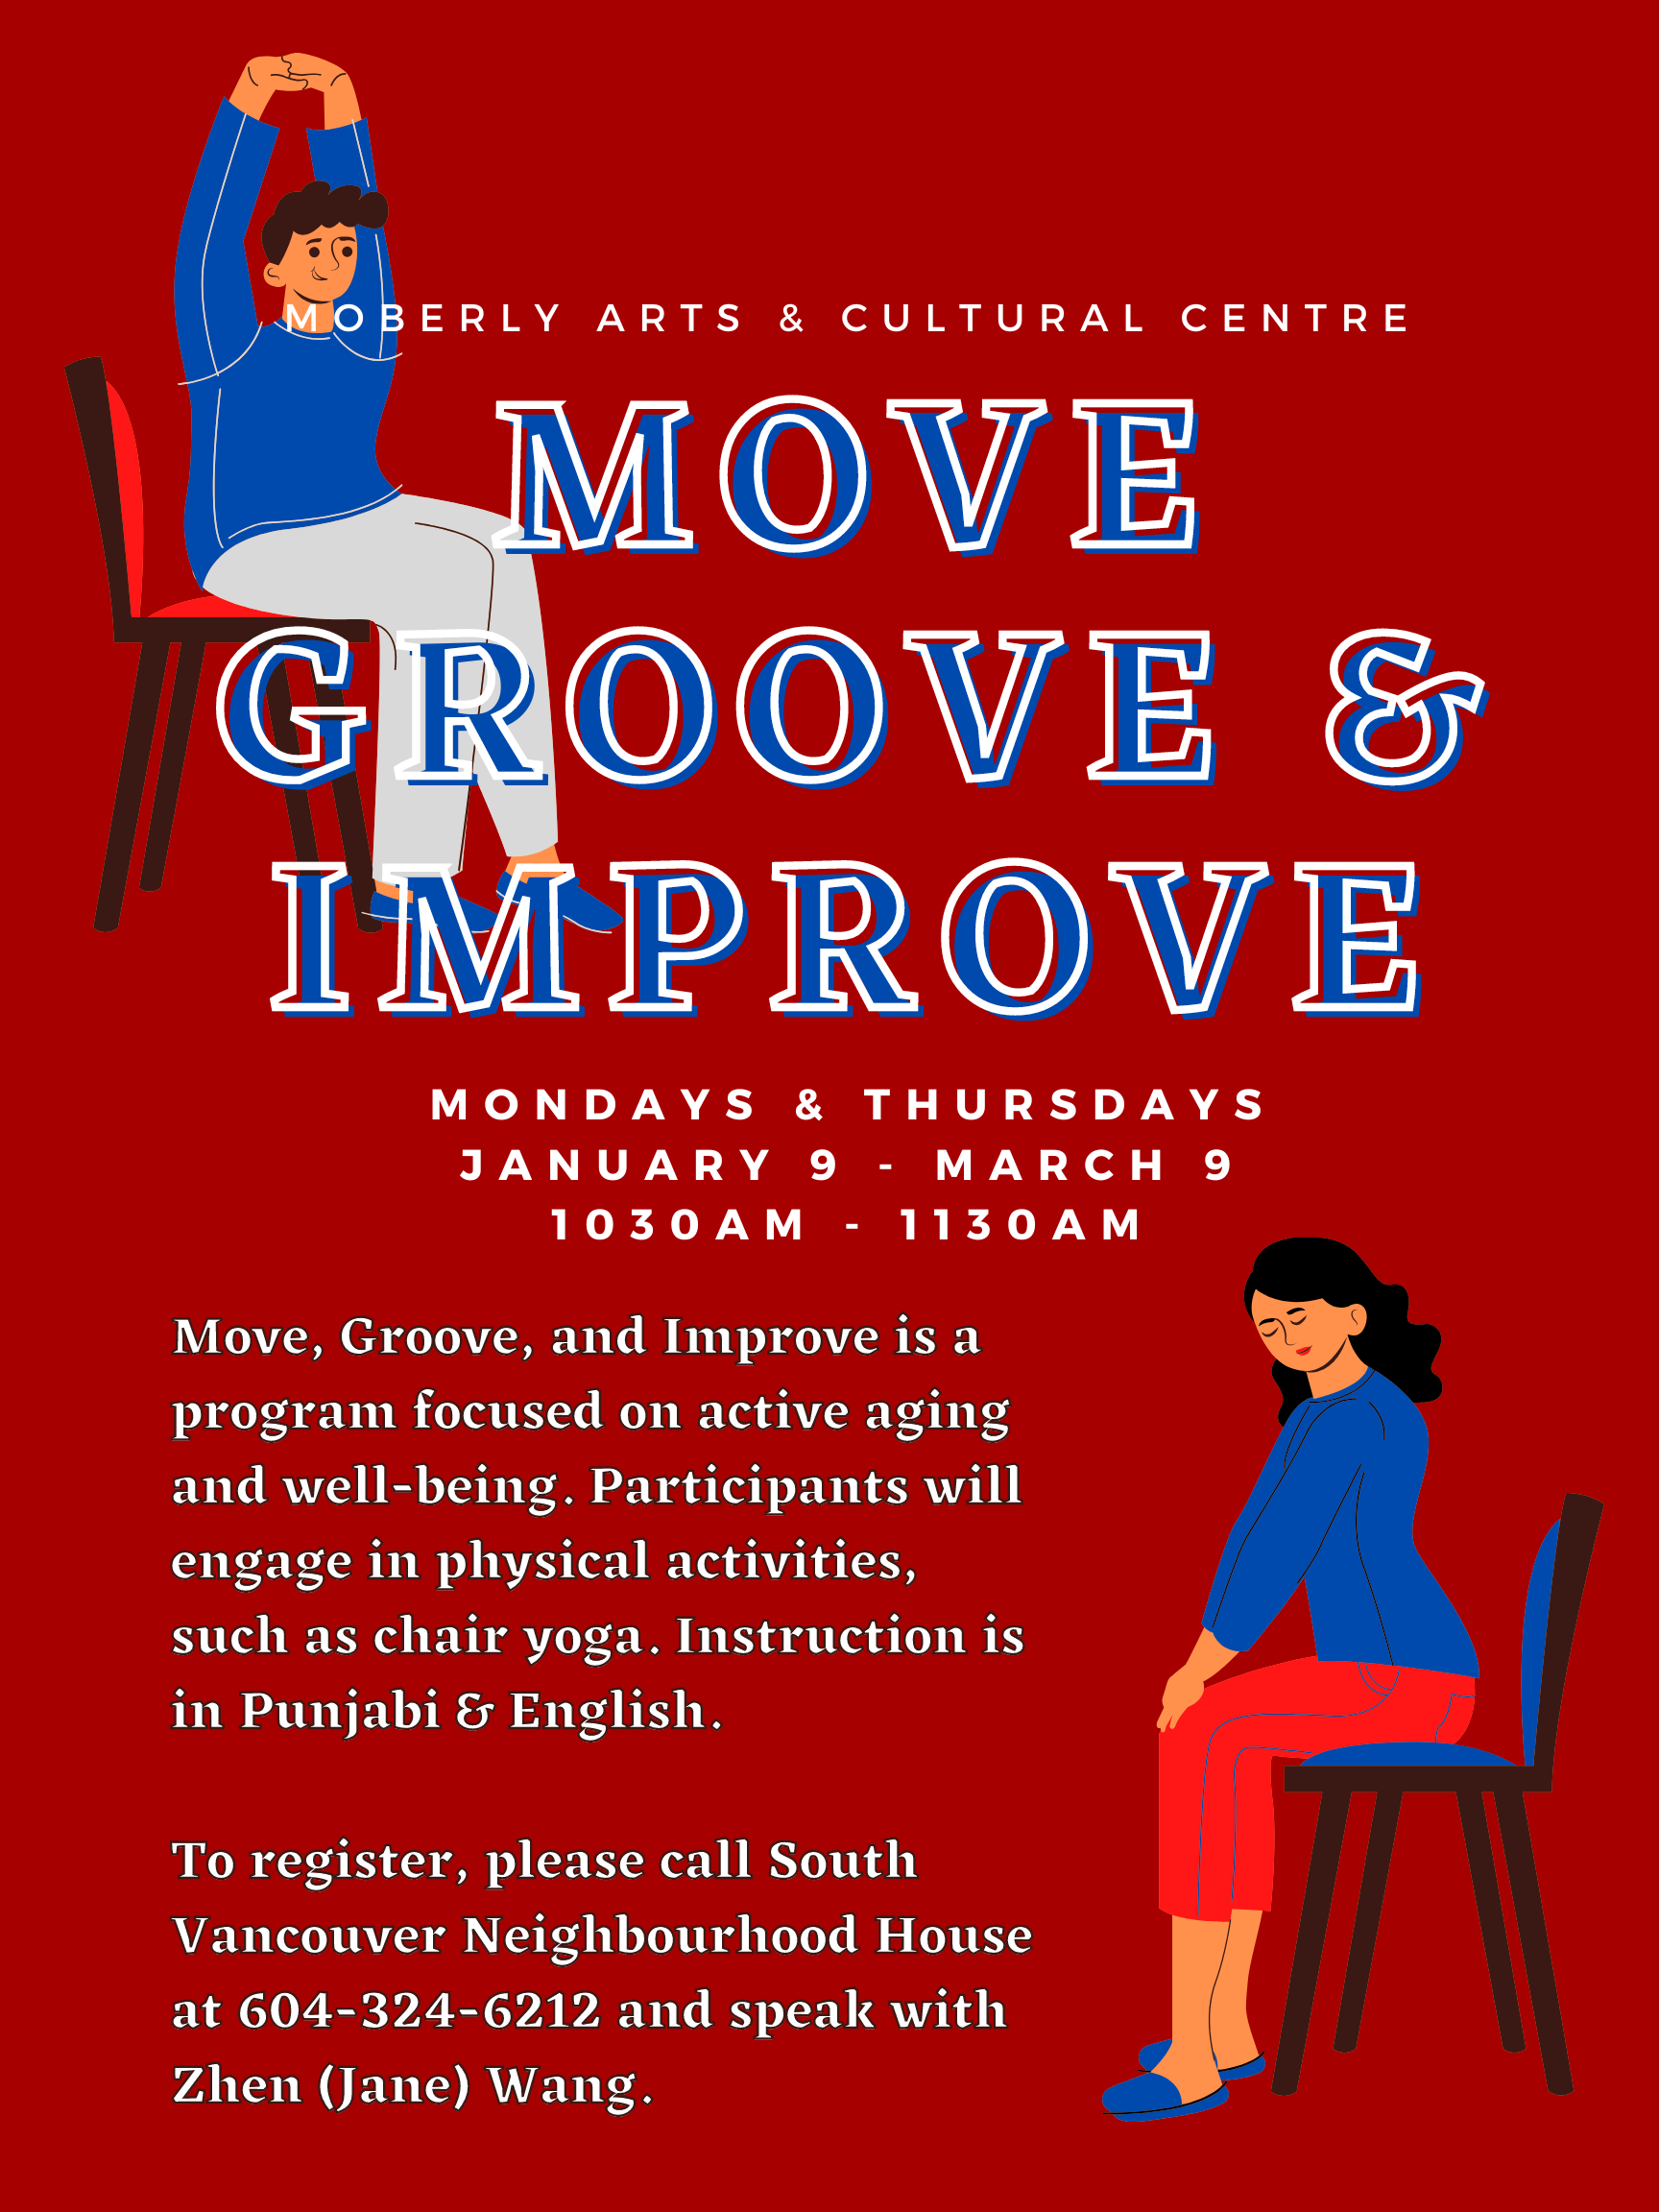 Move Groove and Improve Move, Groove, and Improve is a program focused on active aging and well-being. Participants will engage in physical activities, such as chair yoga. Instruction is in Punjabi and English. All seniors are welcome. You will need to pre-register for the program by calling South Vancouver Neighbourhood House at 604-324-6212. ext. 158 for Zhen Wang Mondays & Thursdays January 9-March 9 10:30-11:30am